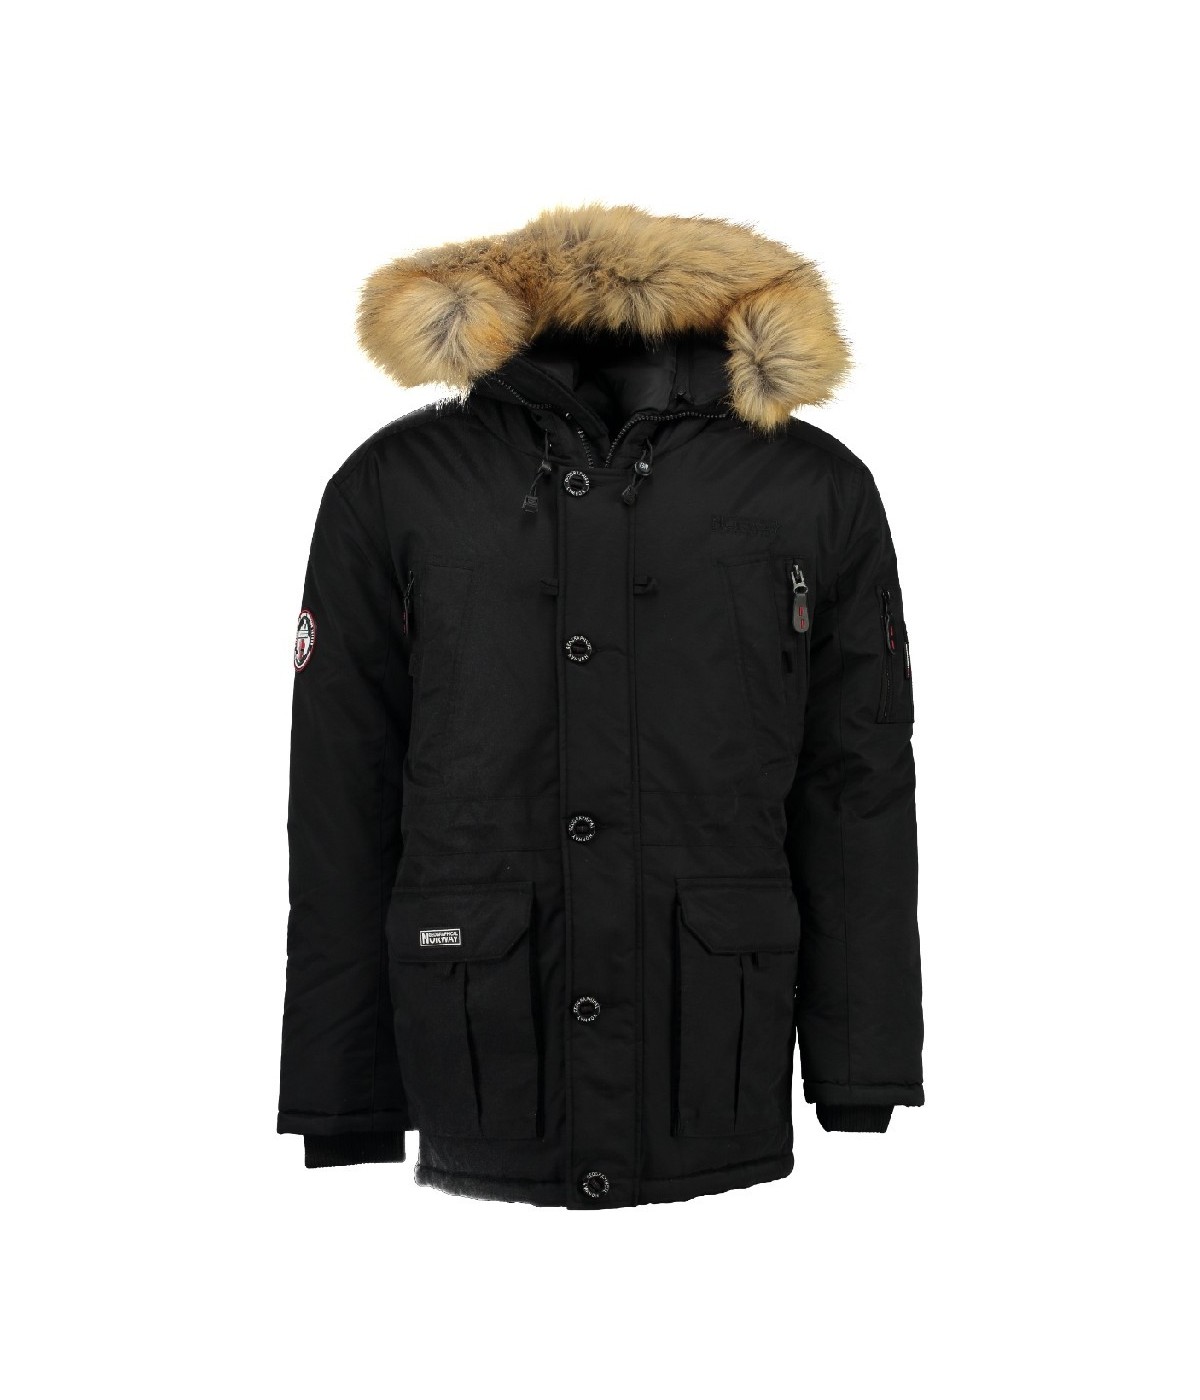 Parka Geographical Norway Boeing Noire